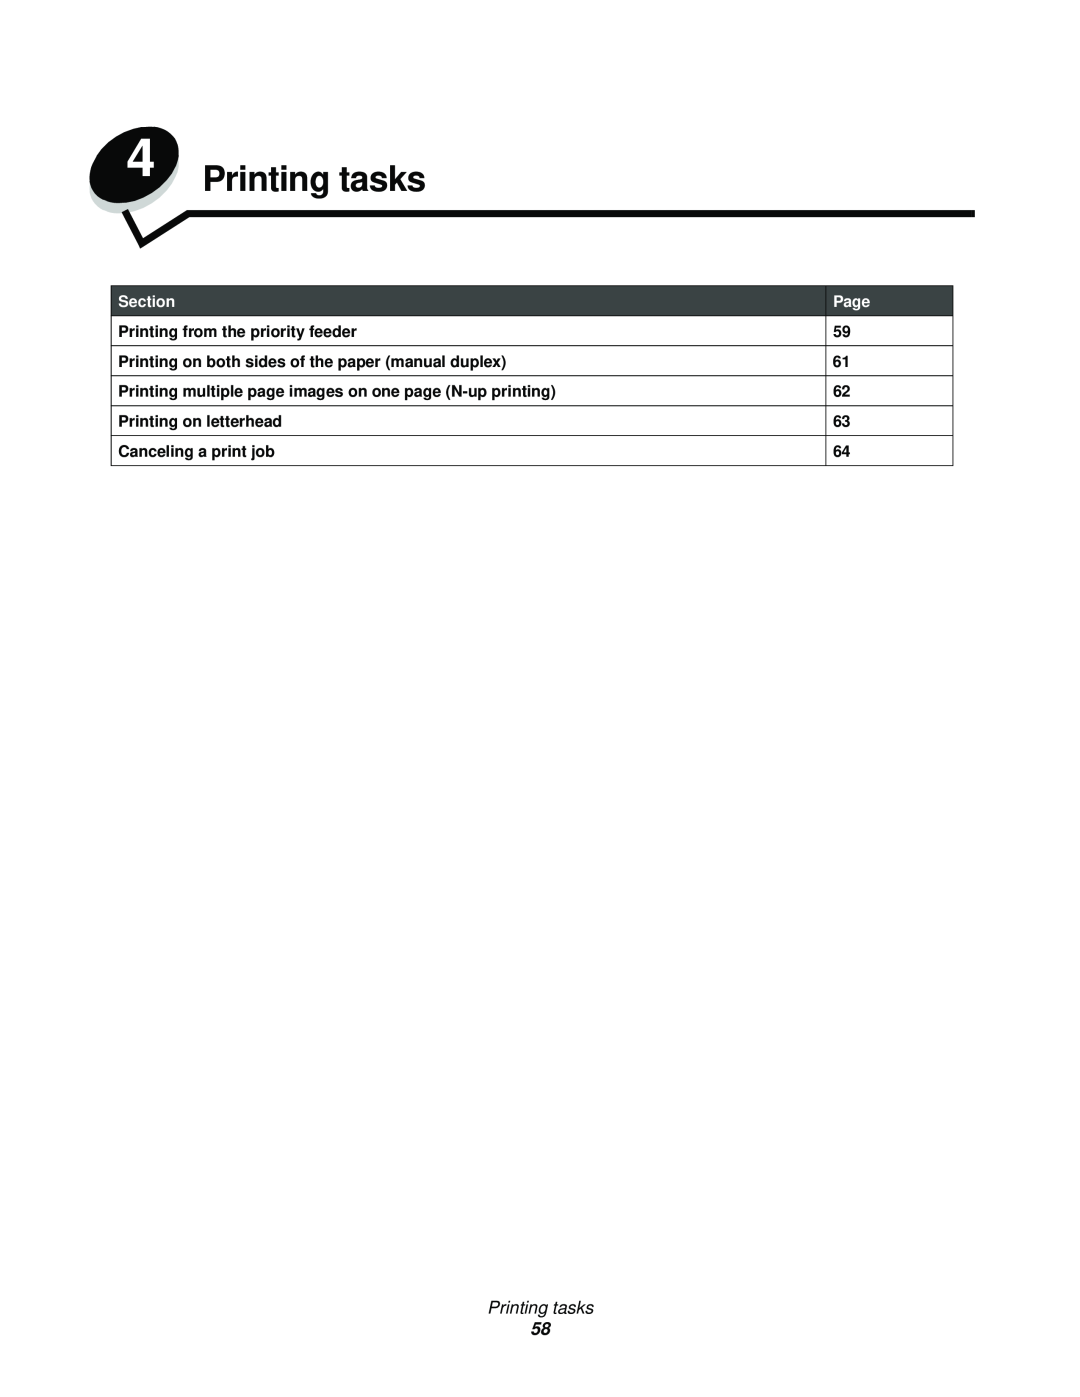 Lexmark 120 Printing tasks, Printing from the priority feeder, Printing on both sides of the paper manual duplex, Section 